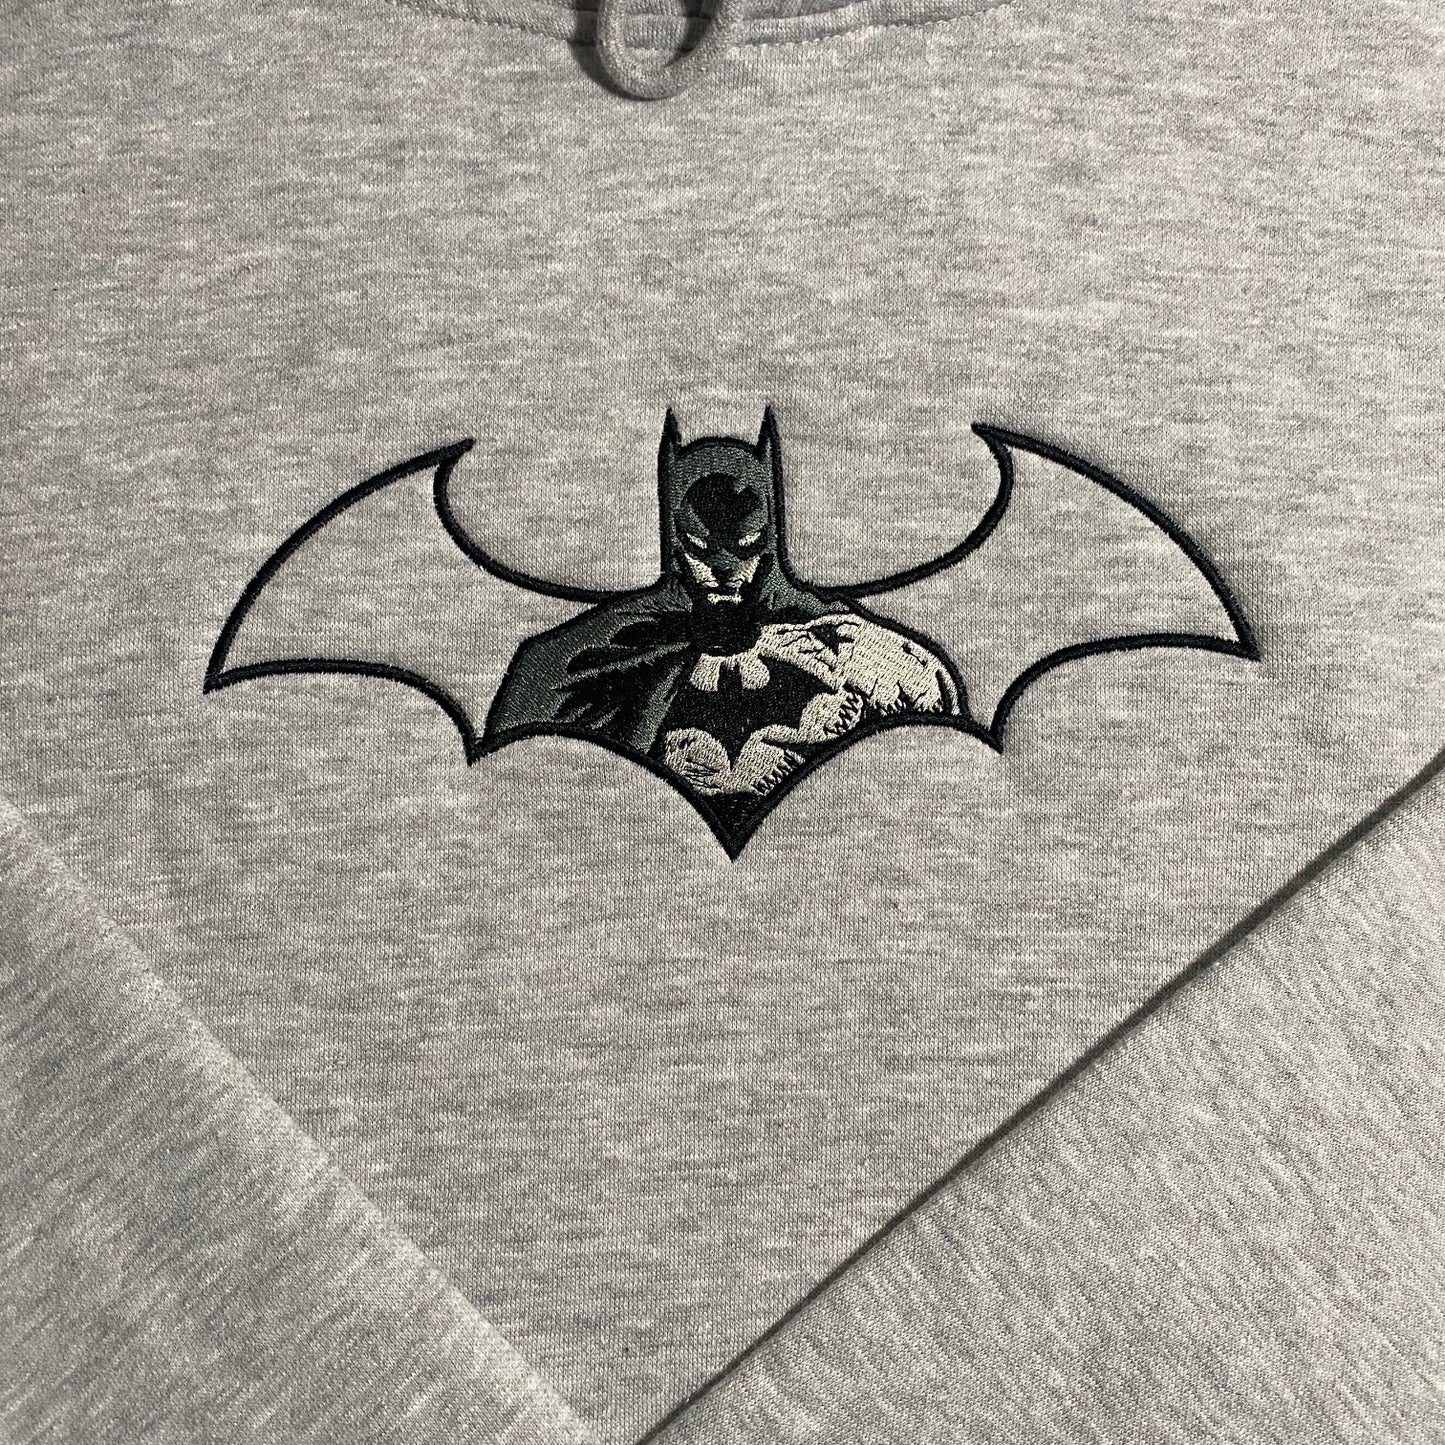 LIMITED Batman EMBROIDERED HOODIE